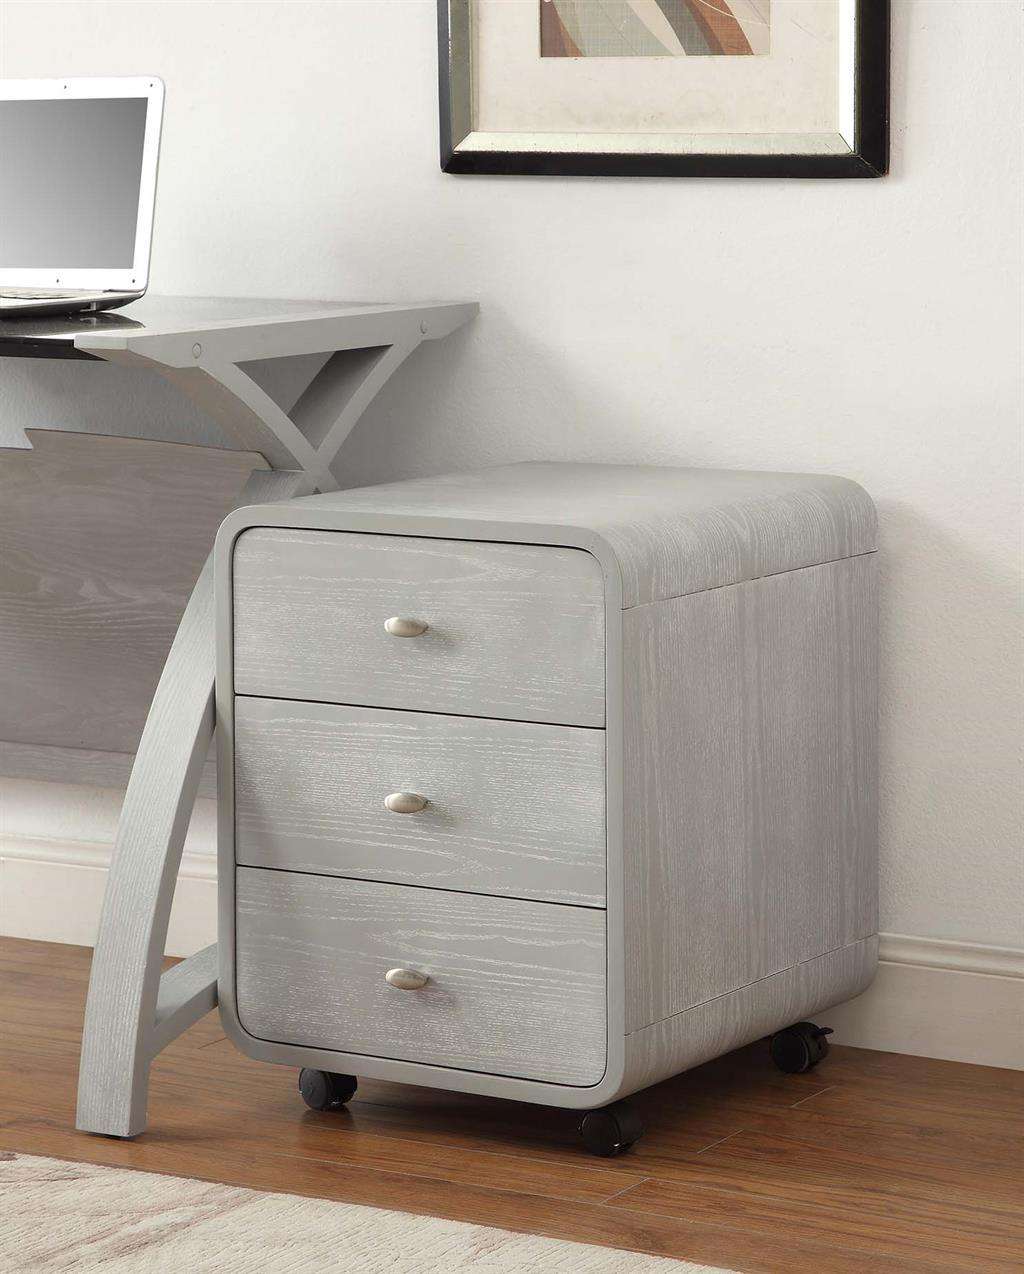 Jual Helsinki PC201-3DR-GB 3-drawer pedestal in Grey Ash in use part of the Curve Office in Grey Ash range designed by Jual Furnishings.in Grey Ash range designed by Jual Furnishings.